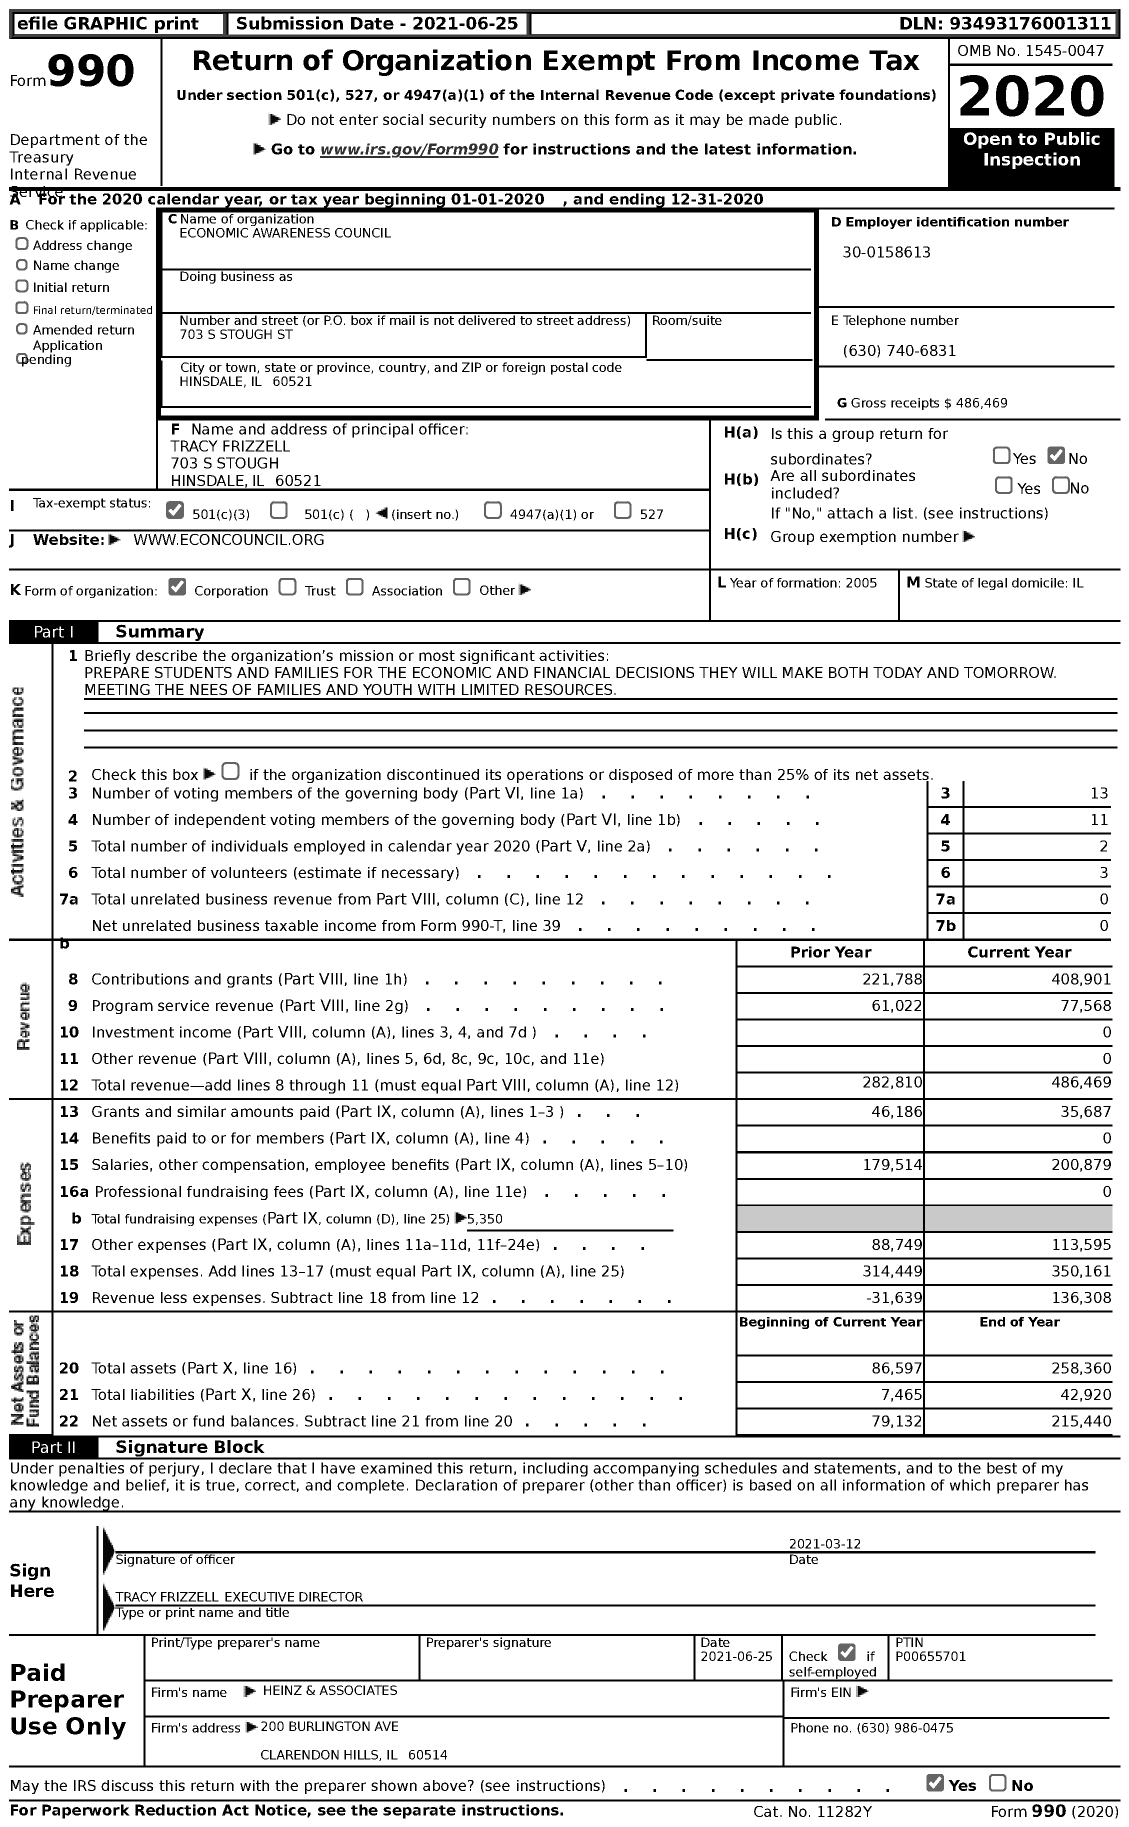 Image of first page of 2020 Form 990 for Economic Awareness Council